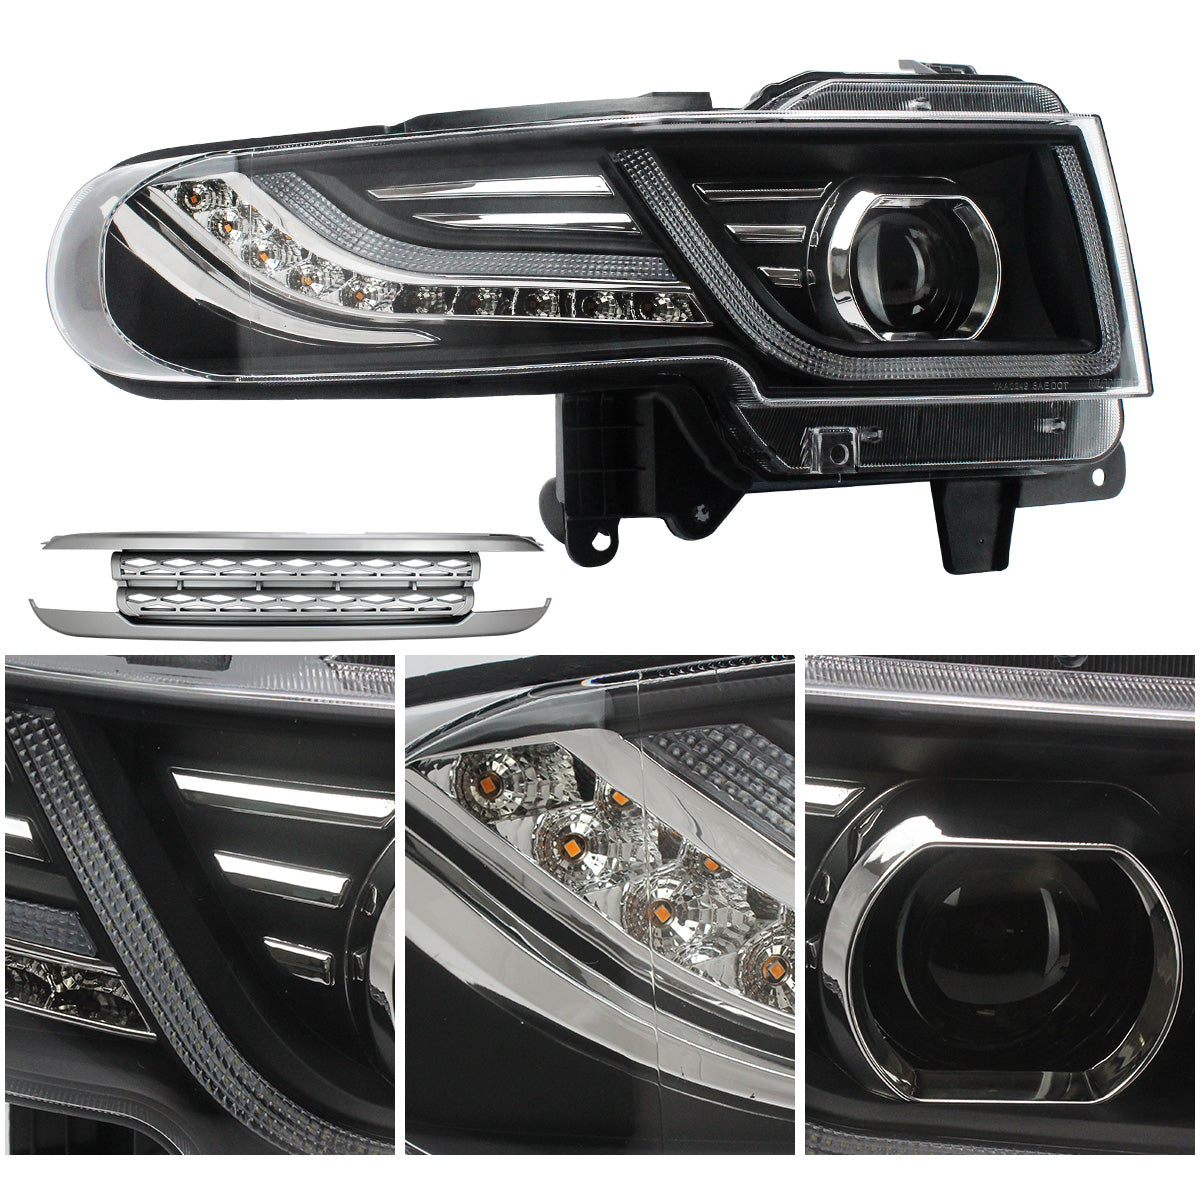 VLAND 07-15 Fj Cruiser LED Headlights With Grille (Bulbs Not Included)